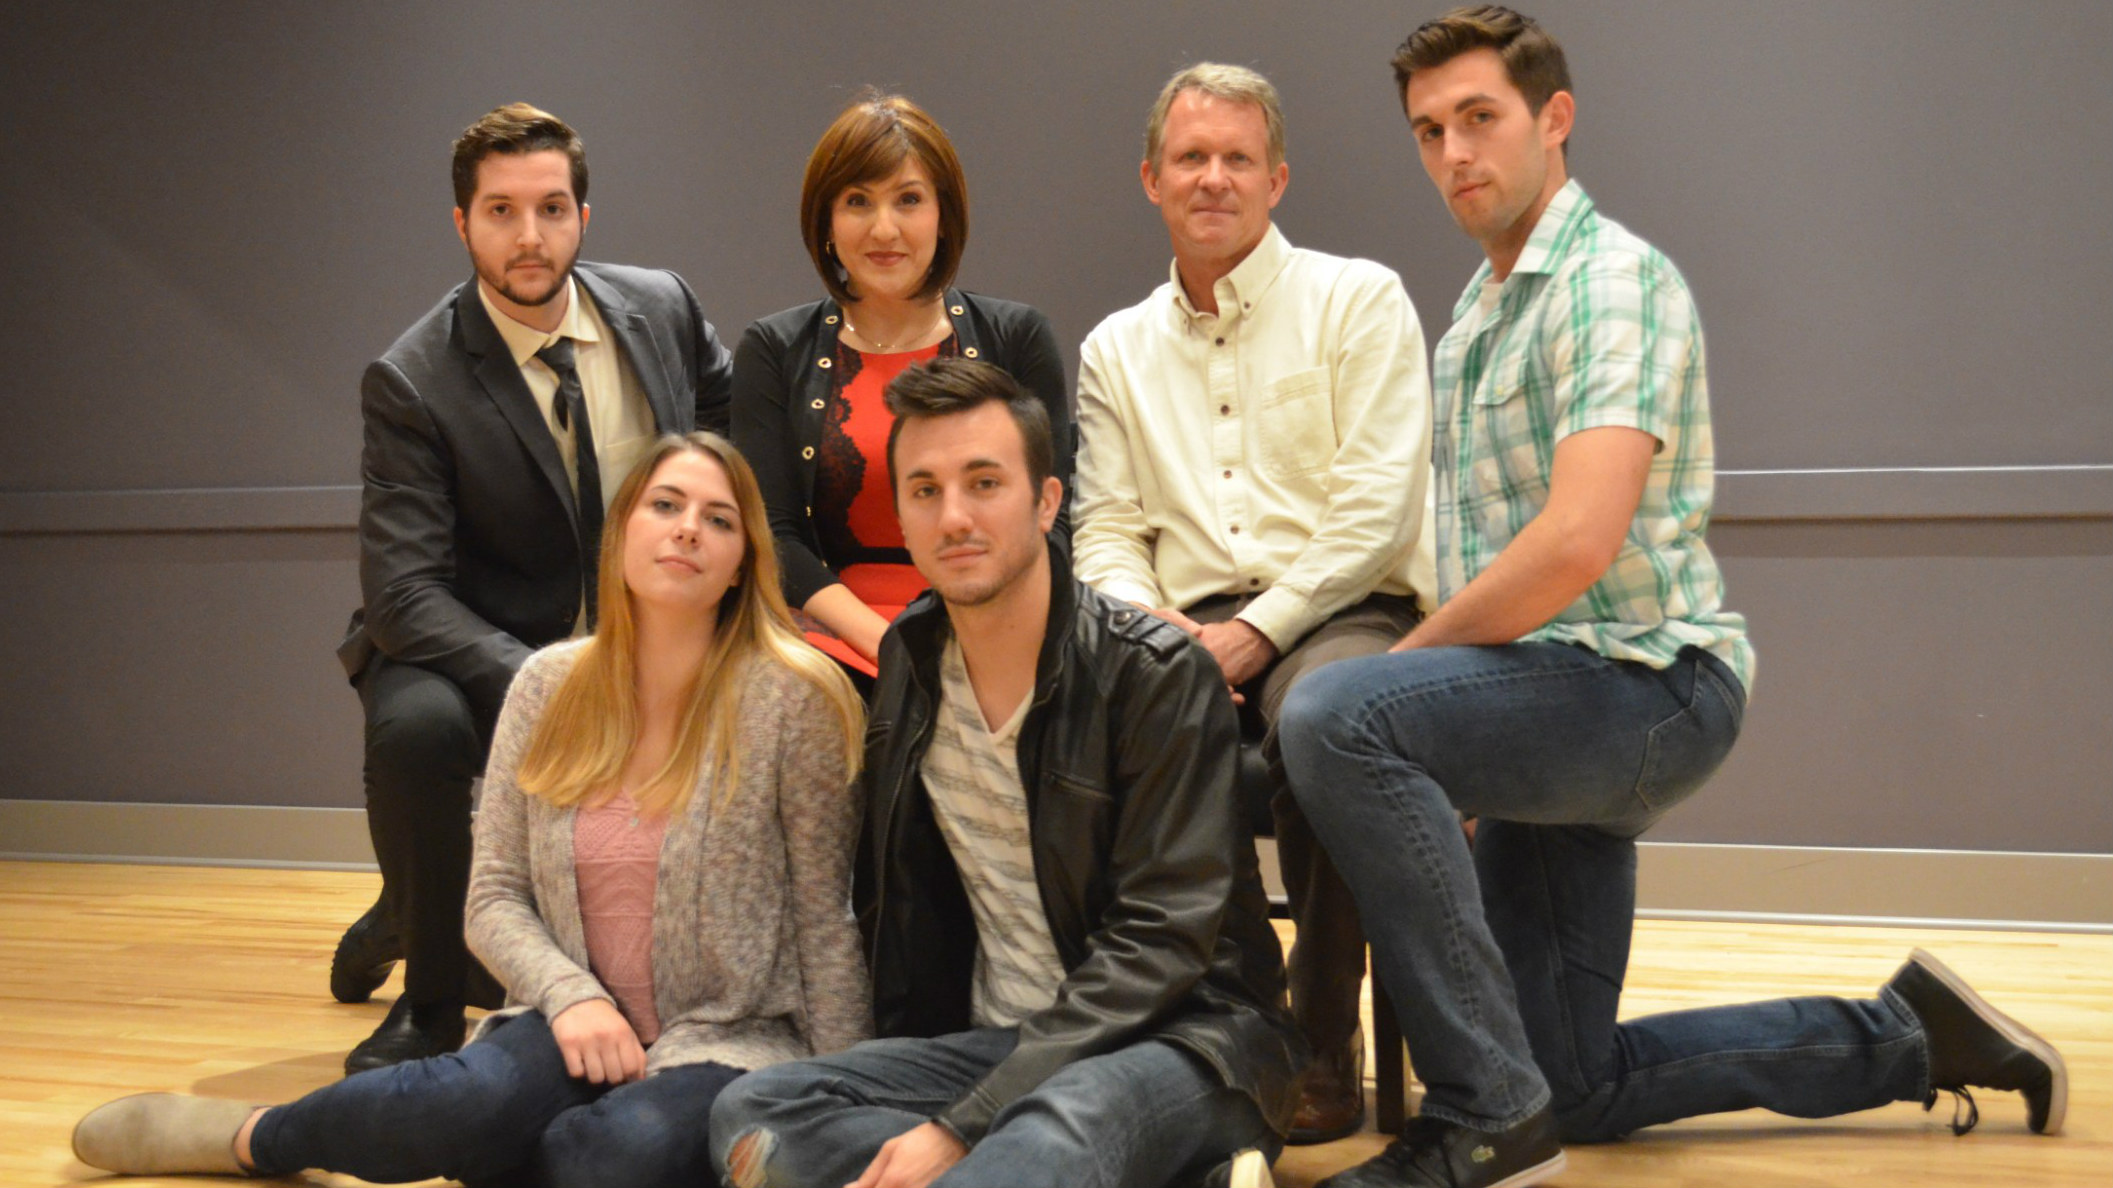 Meet the cast of Next to Normal